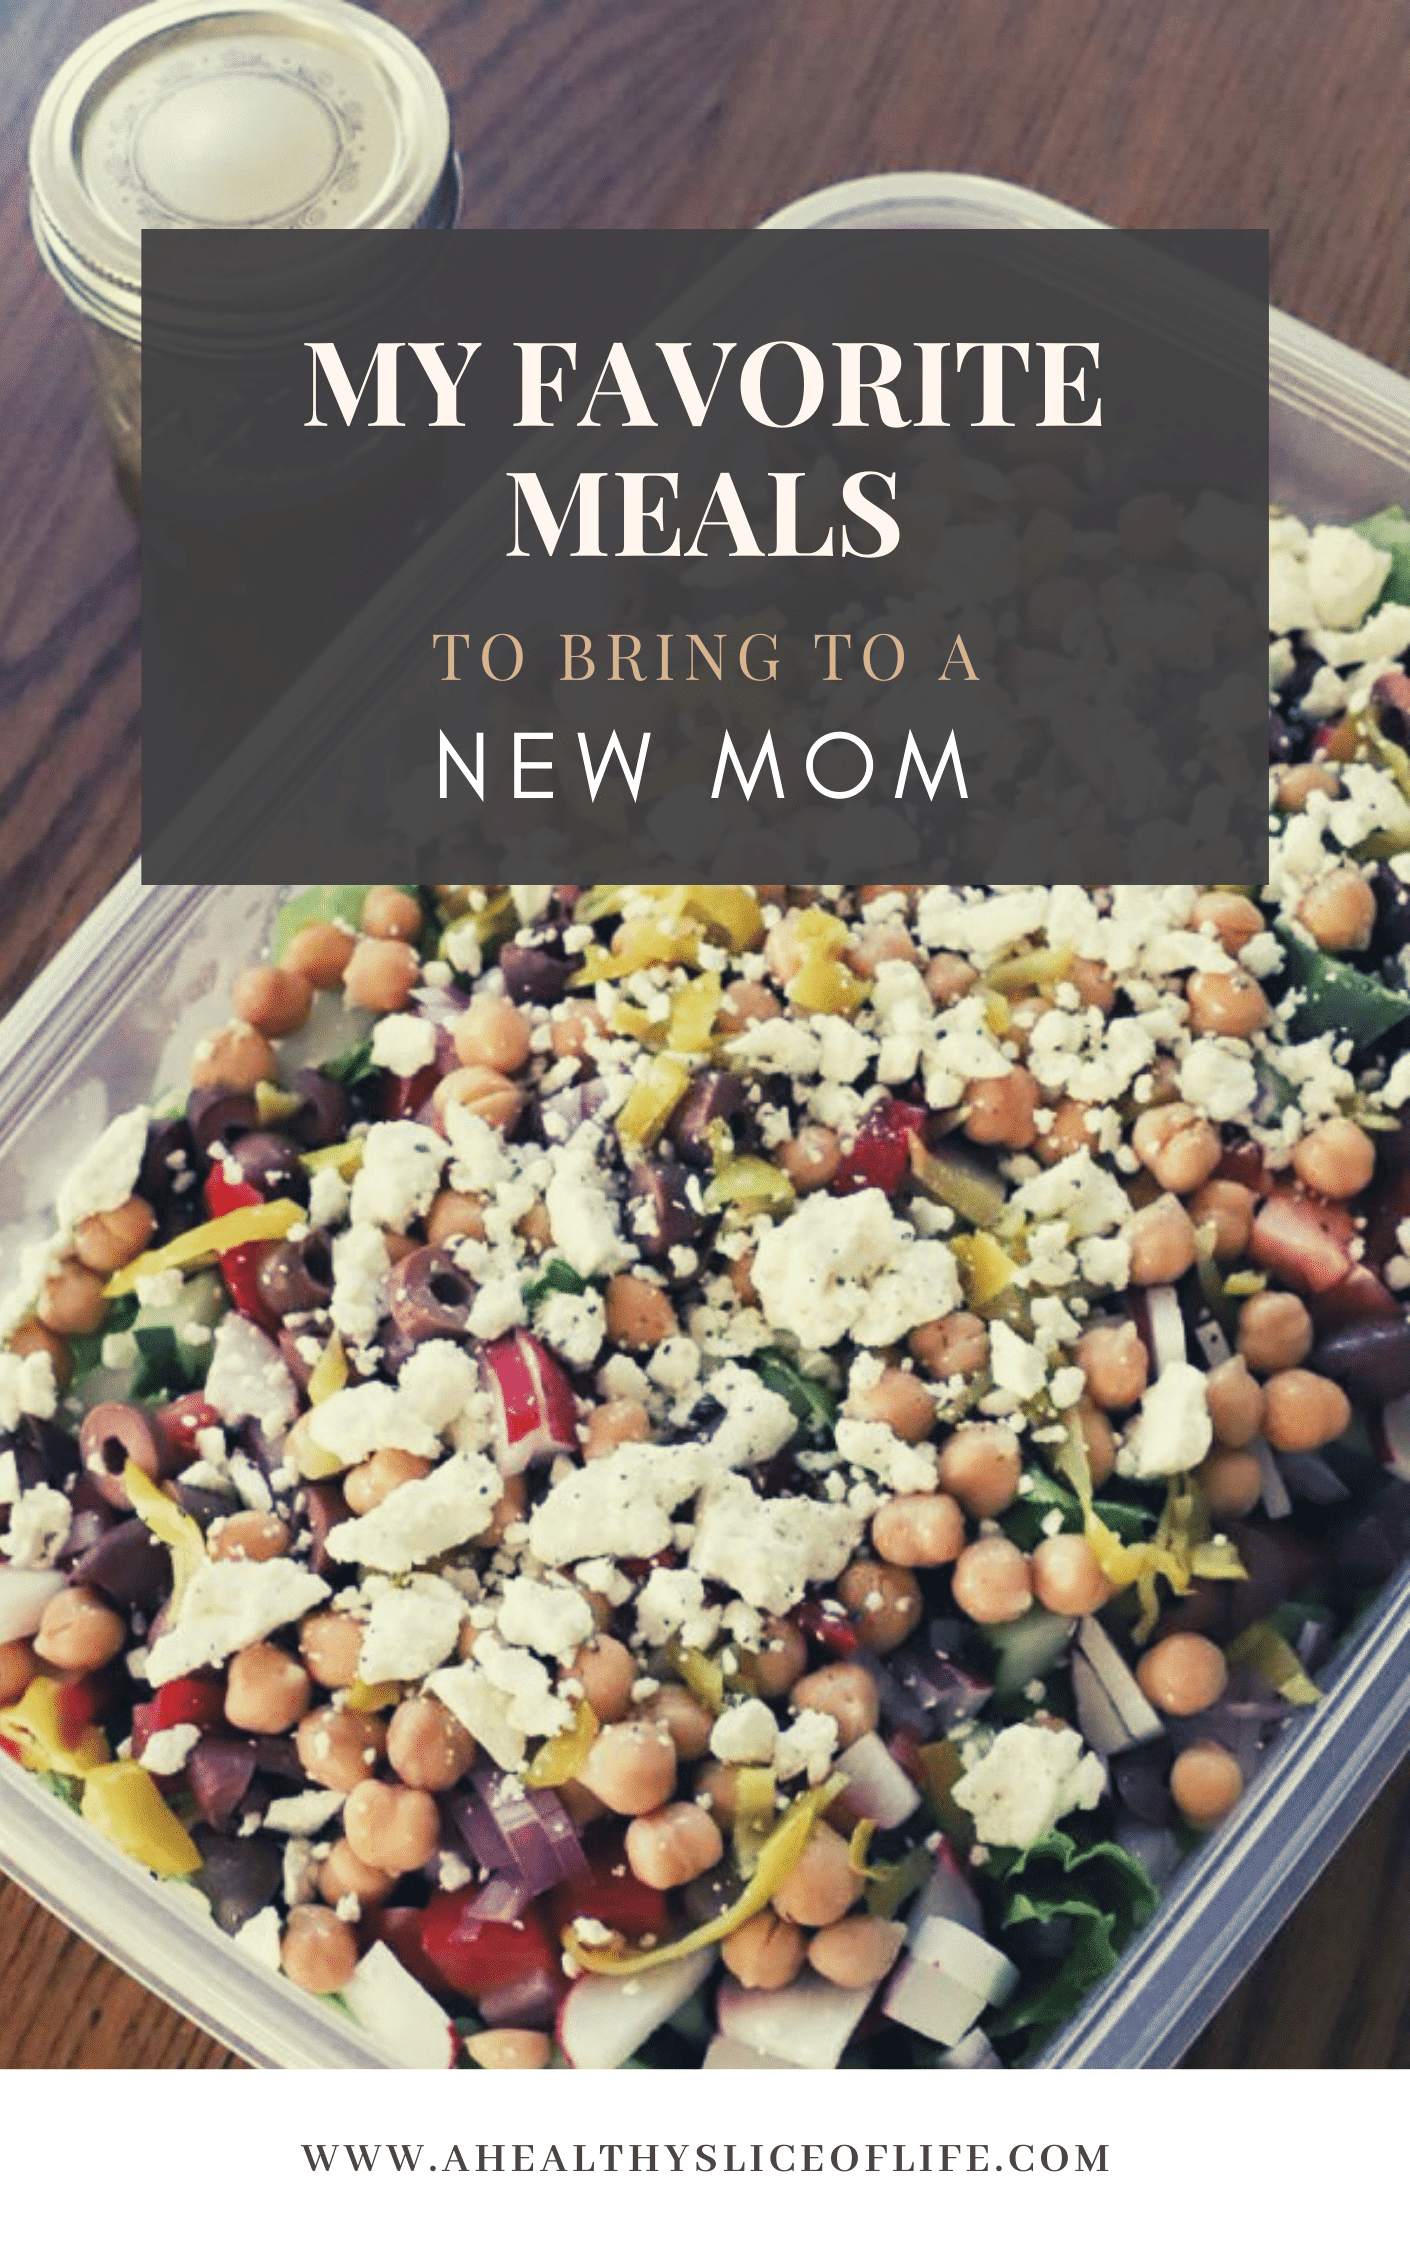 meals to bring a new mom